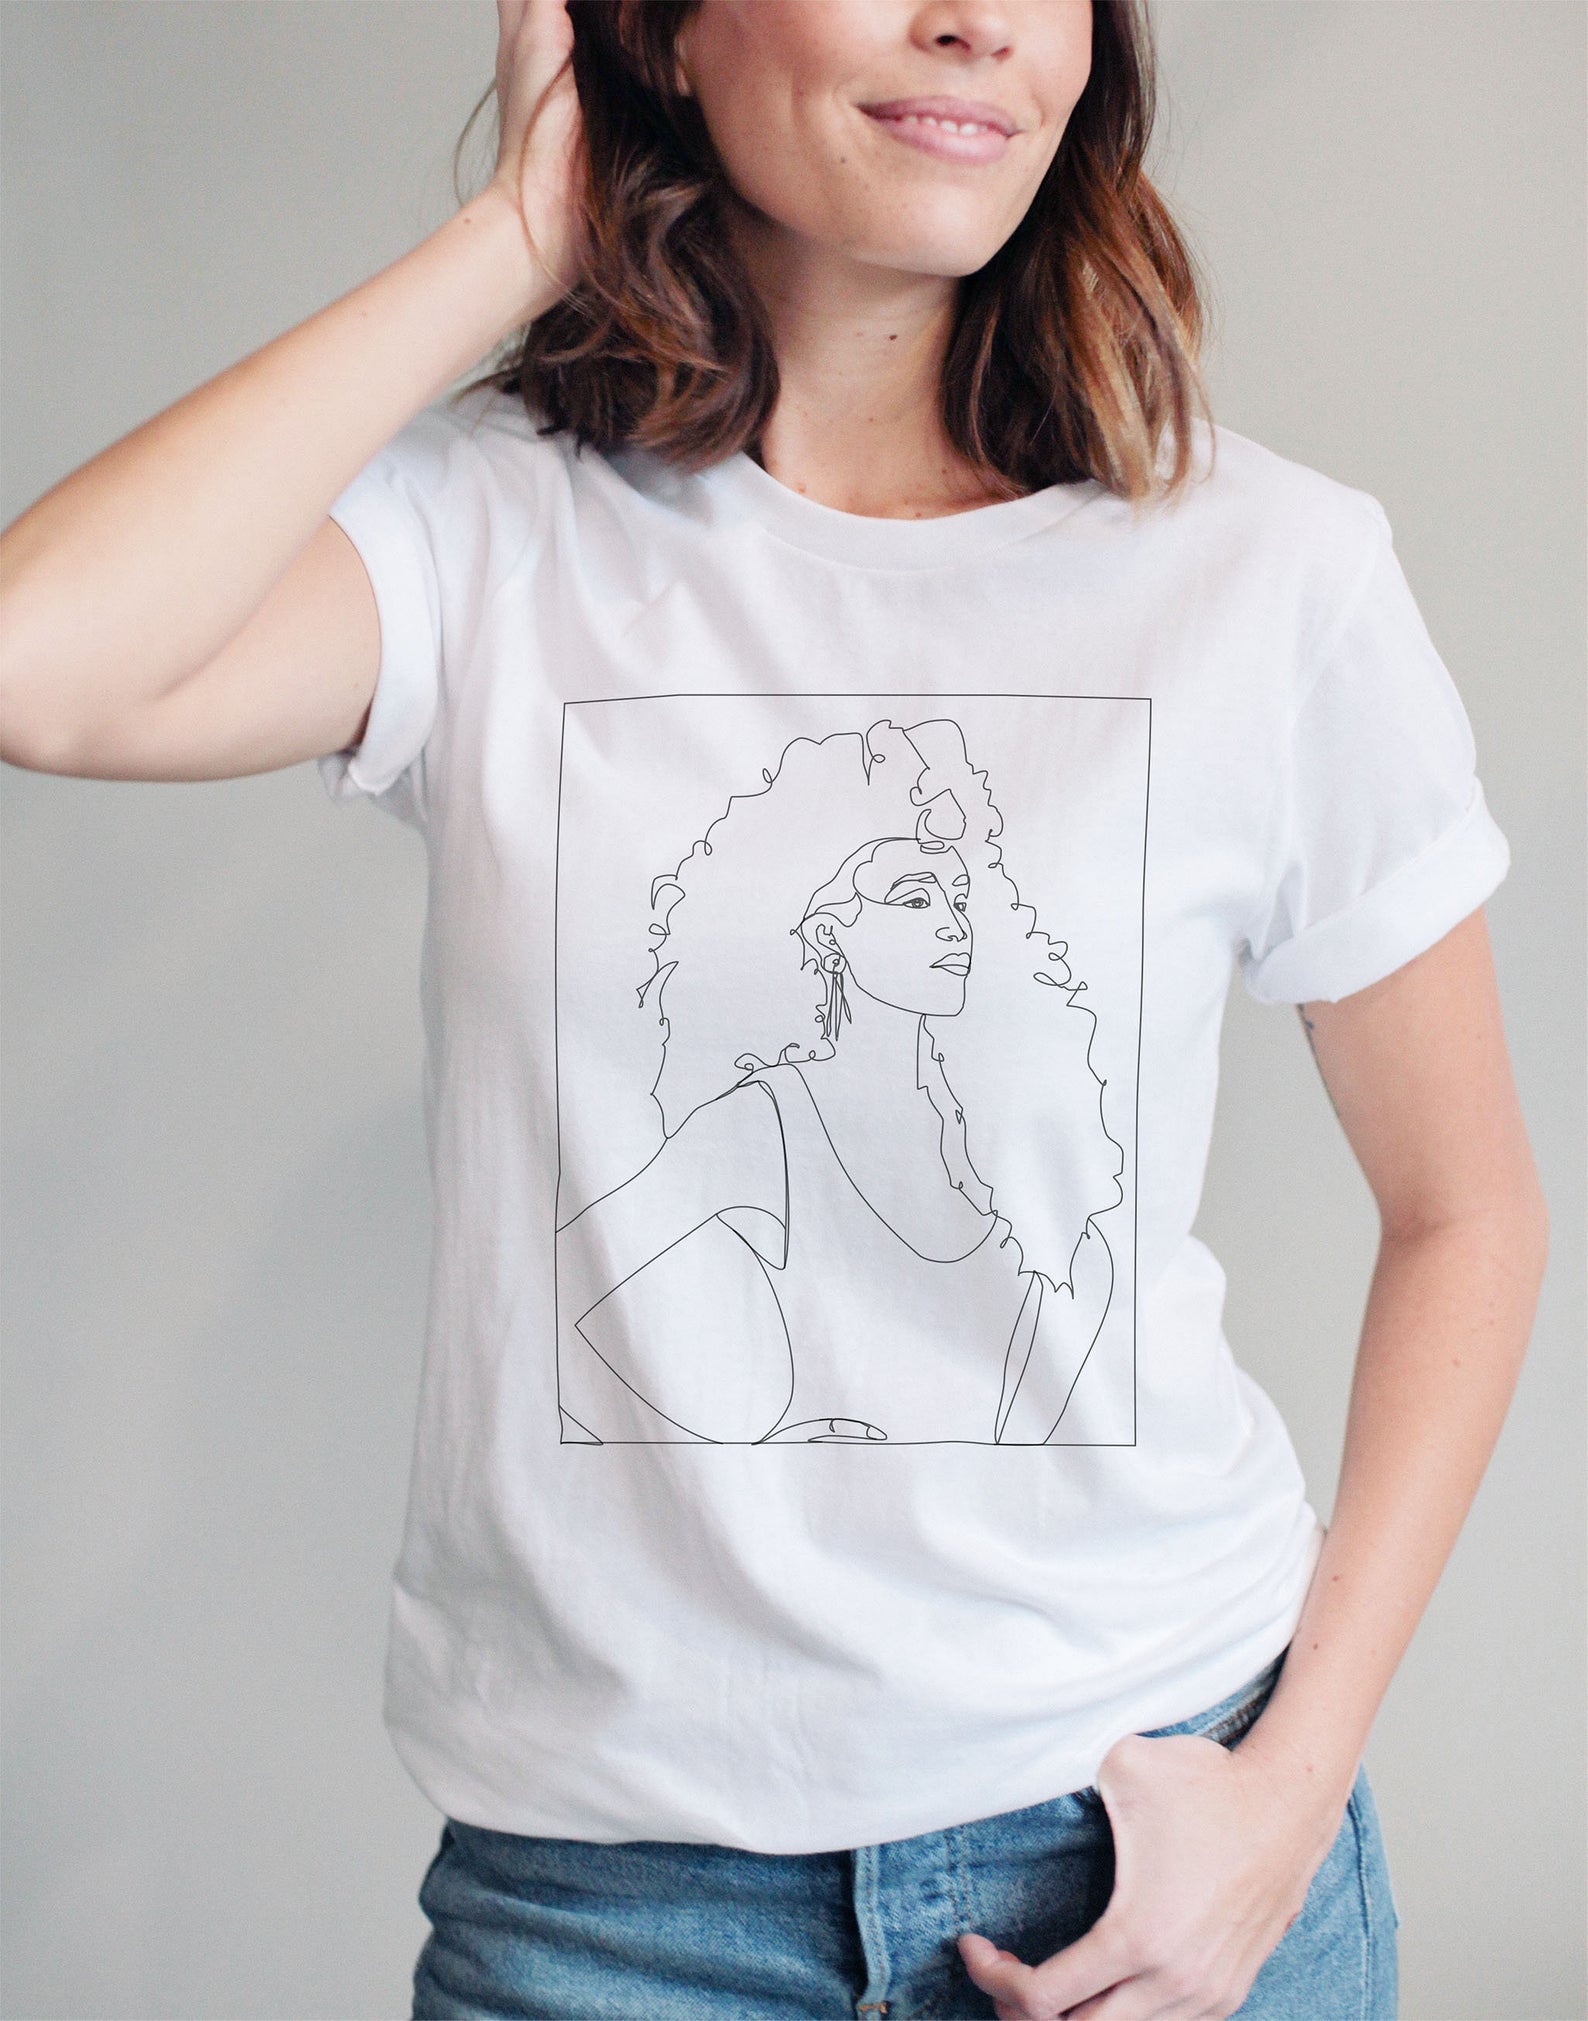 11 Whitney Houston T-Shirts You Can Rock To Celebrate Her Life